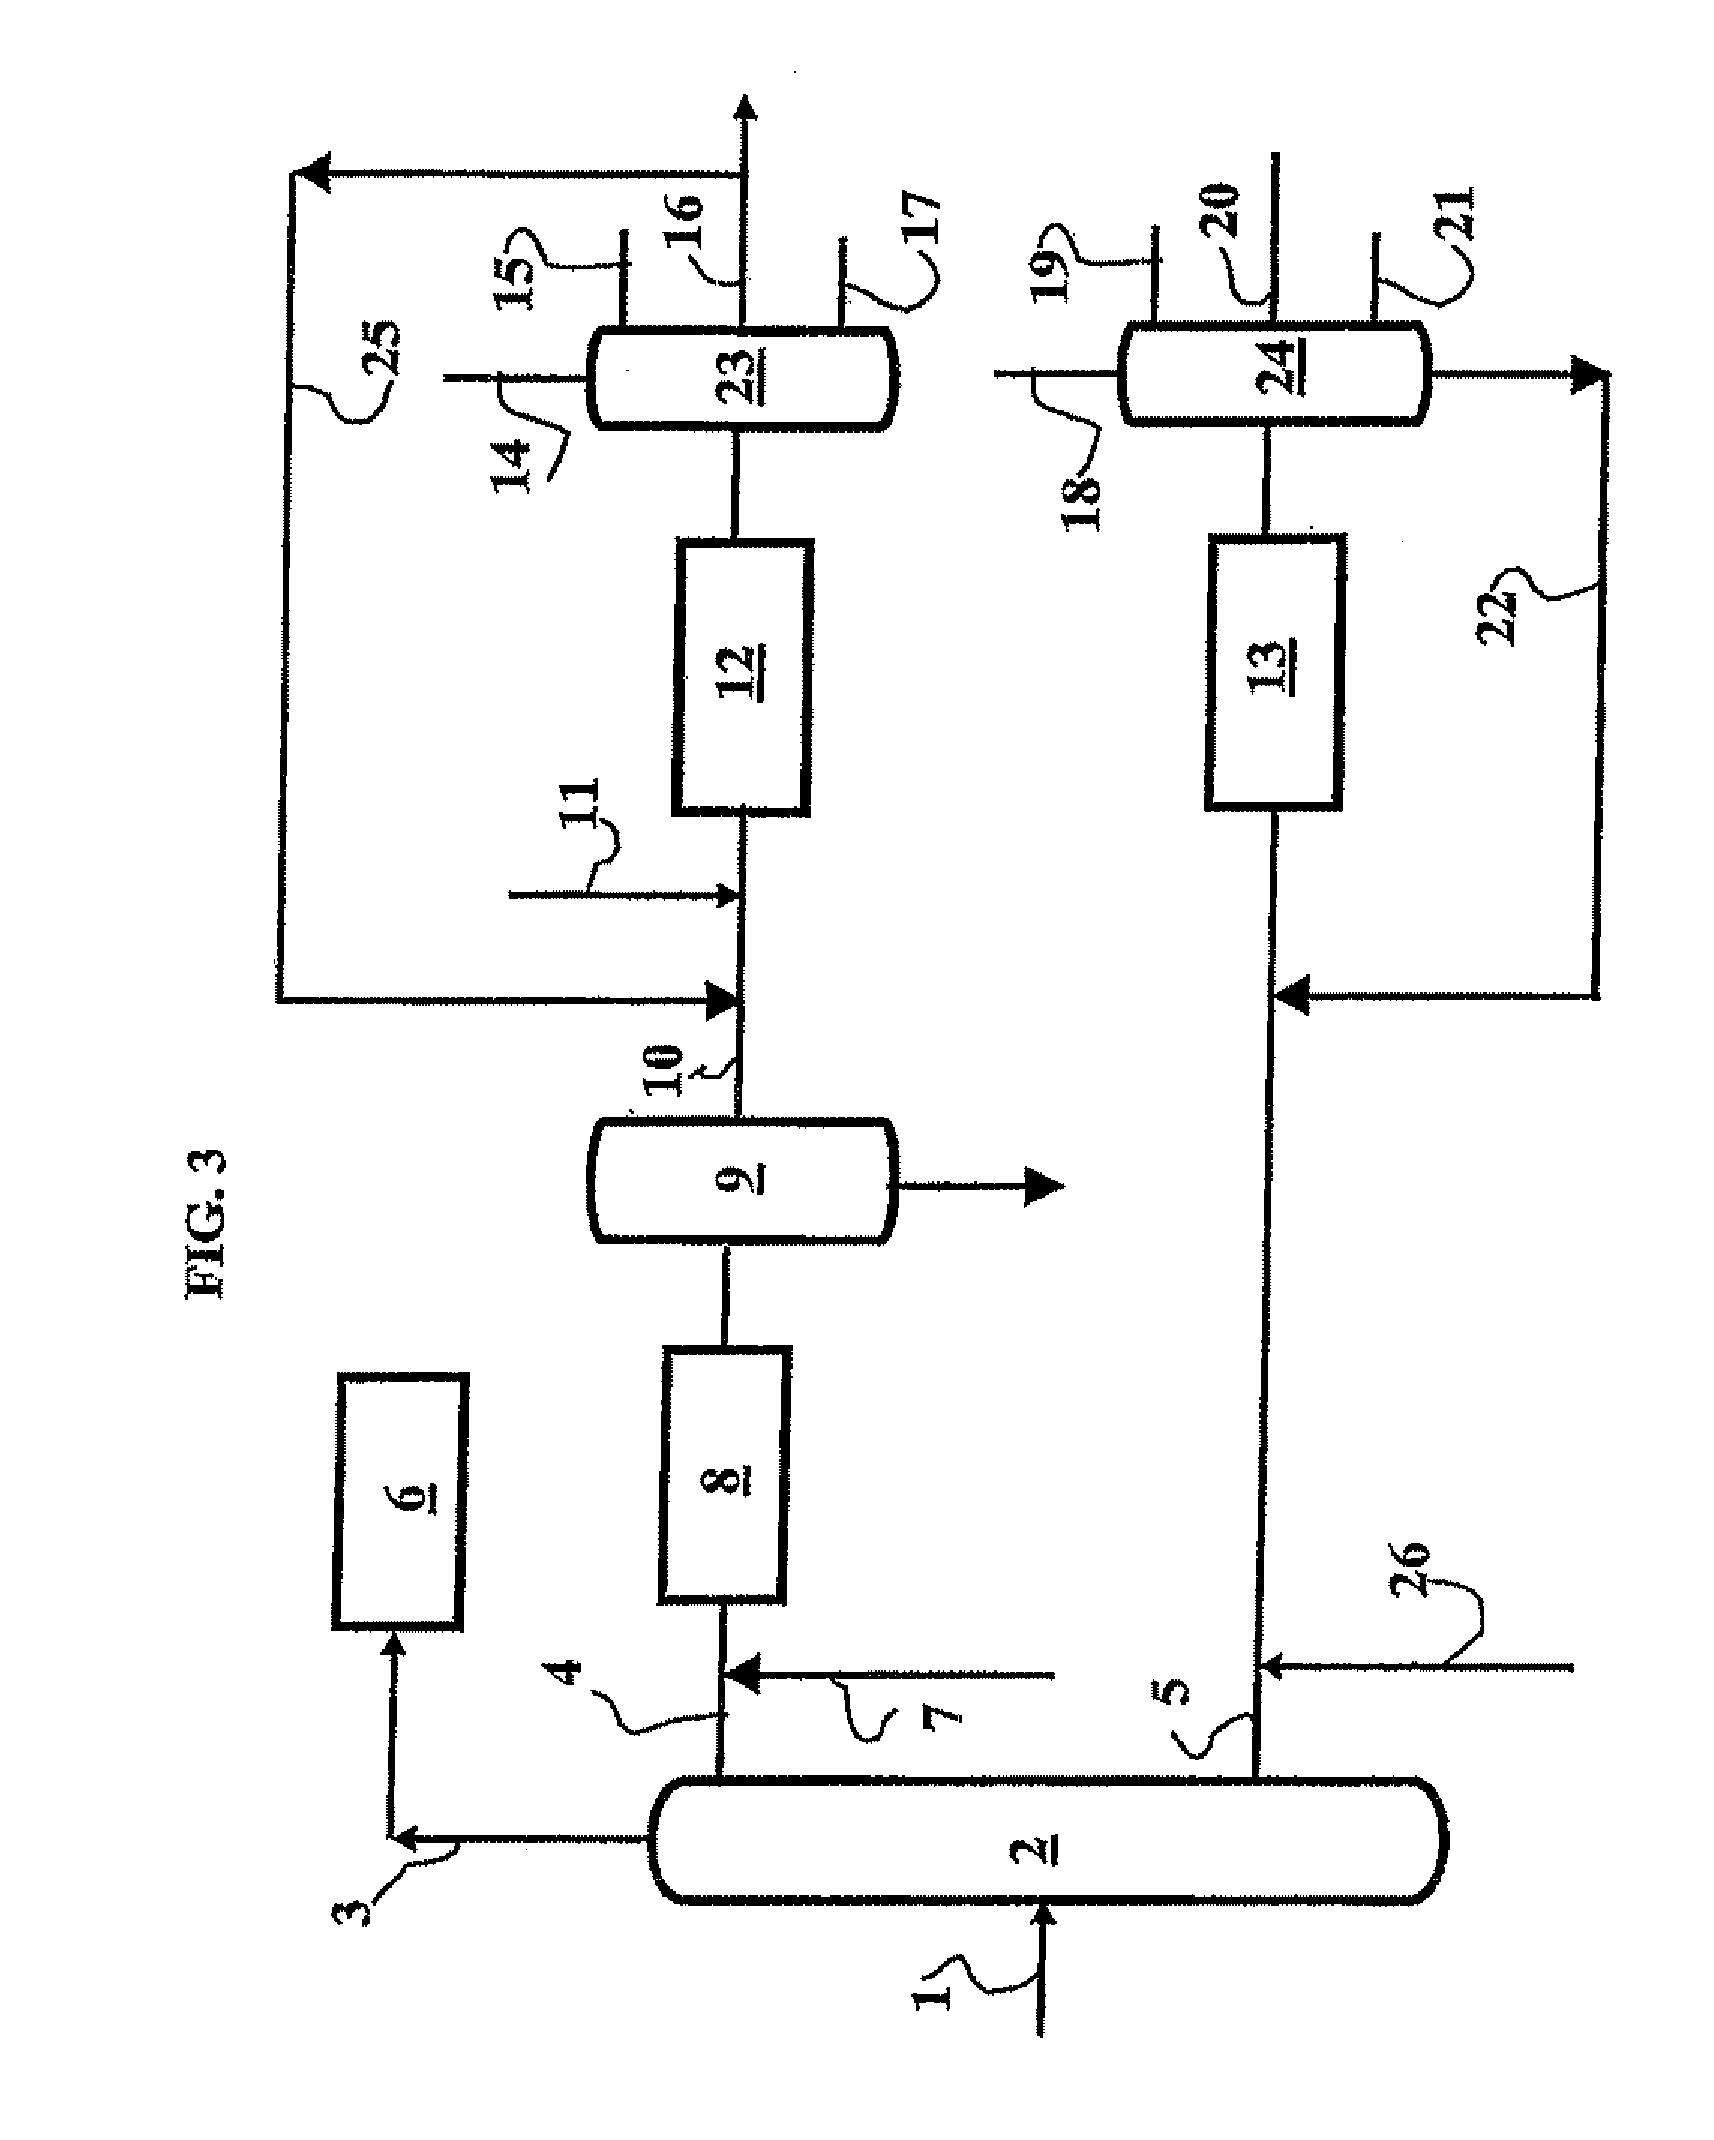 Process for producing middle distillates by hydrocracking of feedstocks obtained by the fischer-tropsch process in the presence of a catalyst comprising an IZM-2 solid